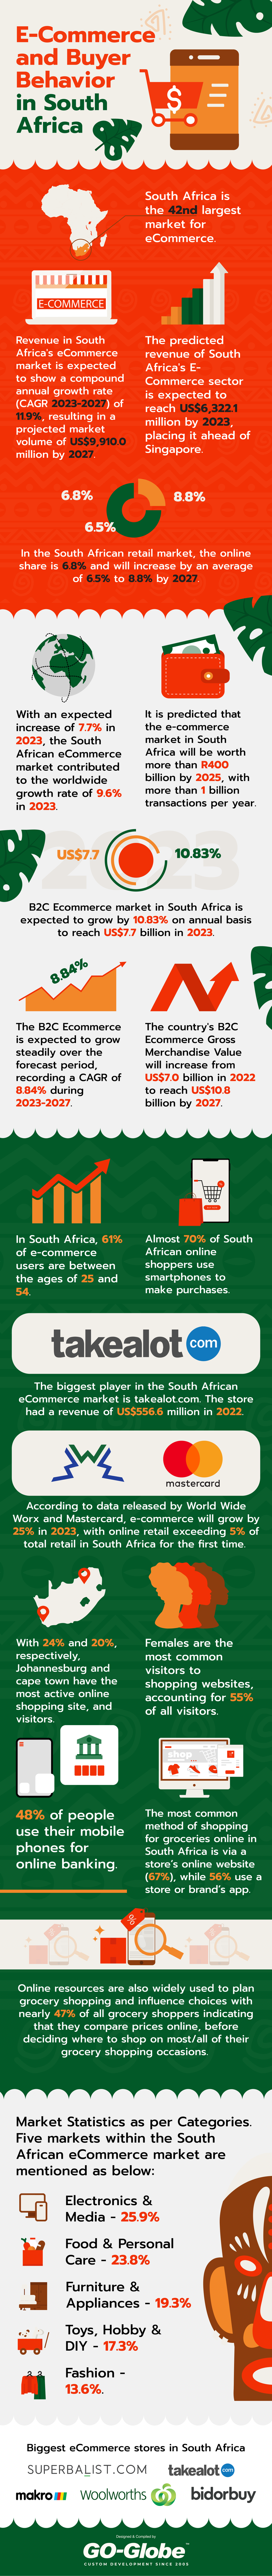 E-Commerce and Buyer Behavior in South Africa